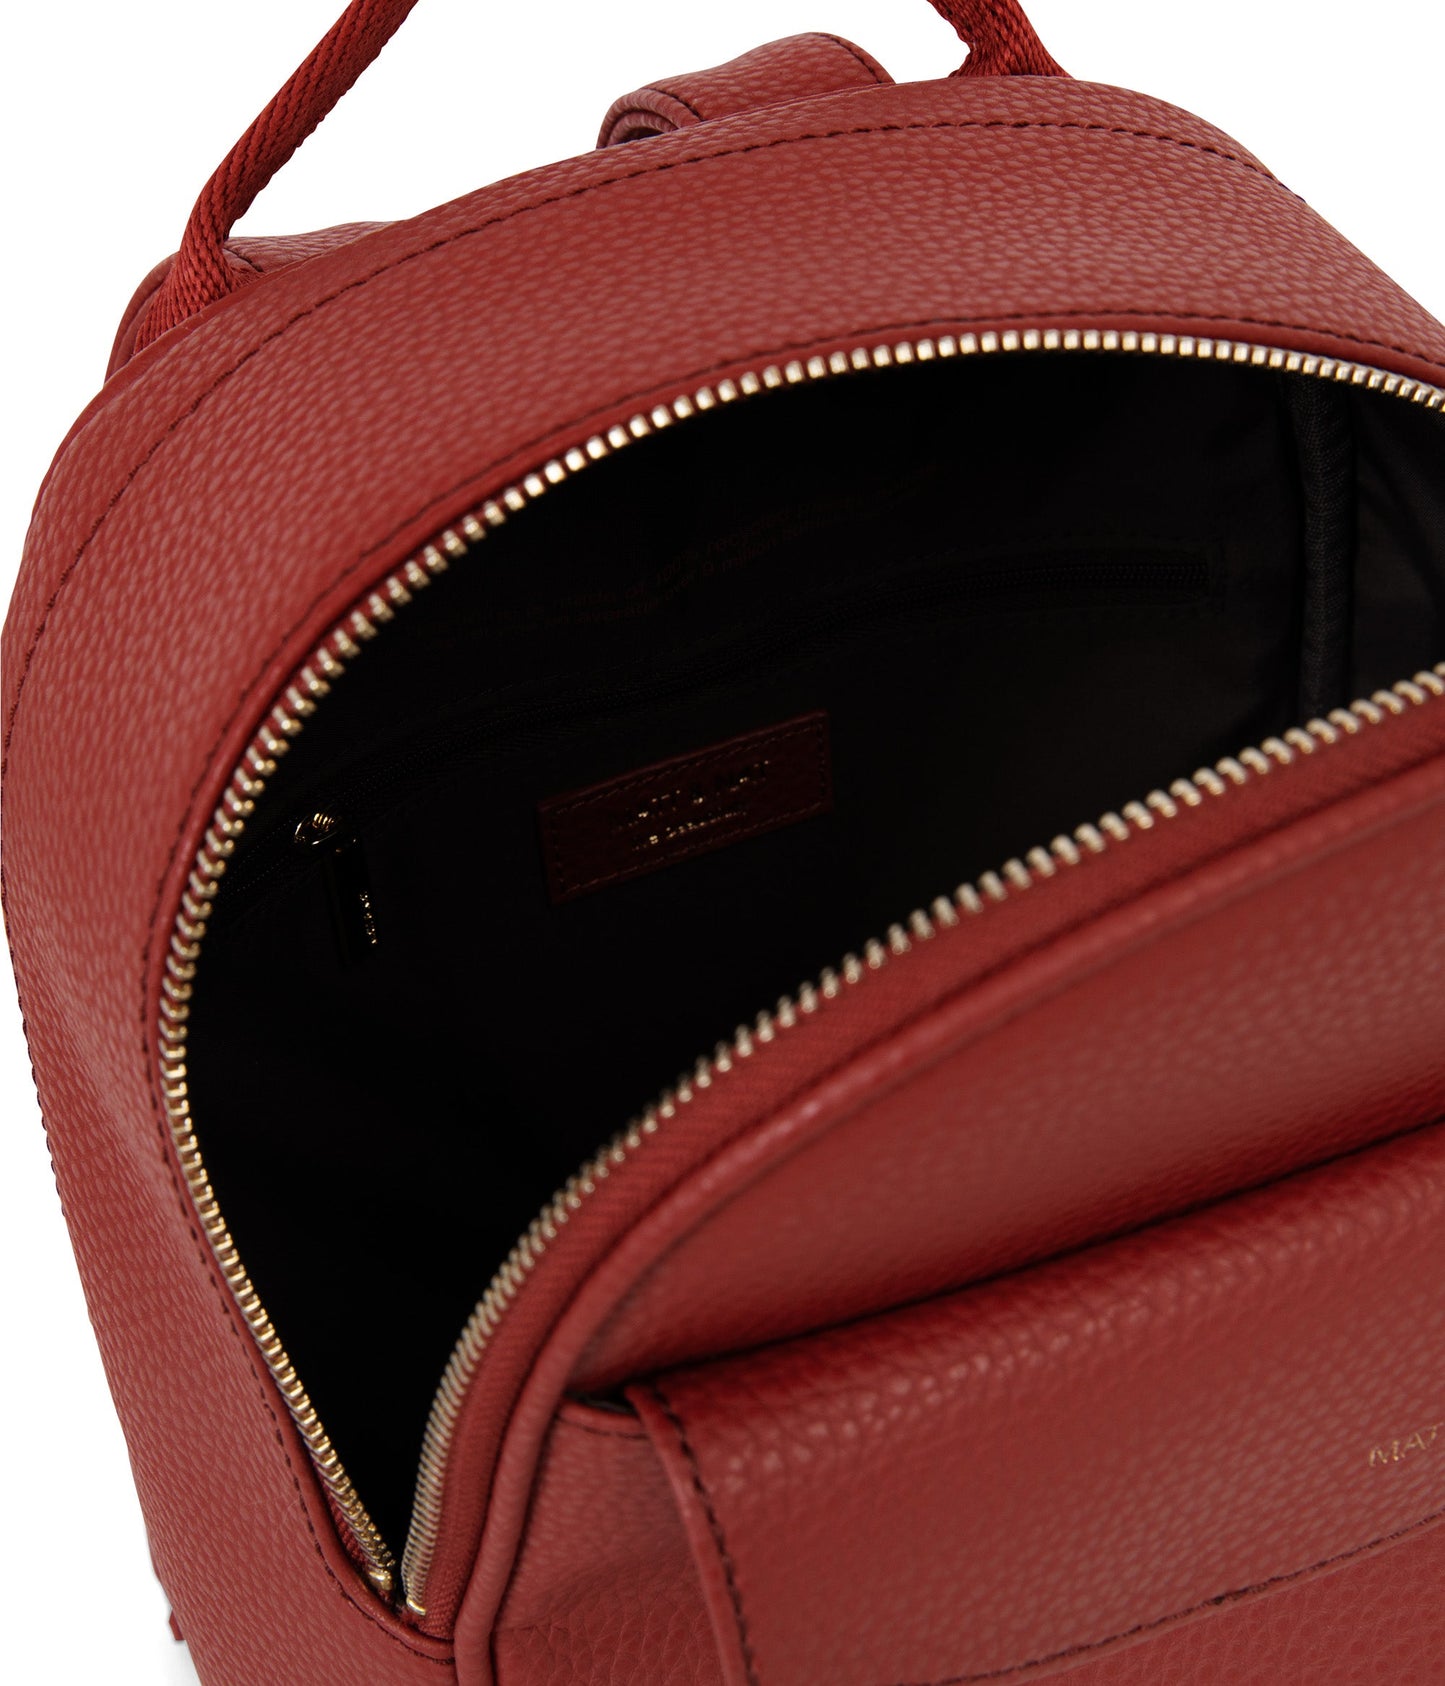 HARLEM Small Vegan Backpack - Purity | Color: Red - variant::passion